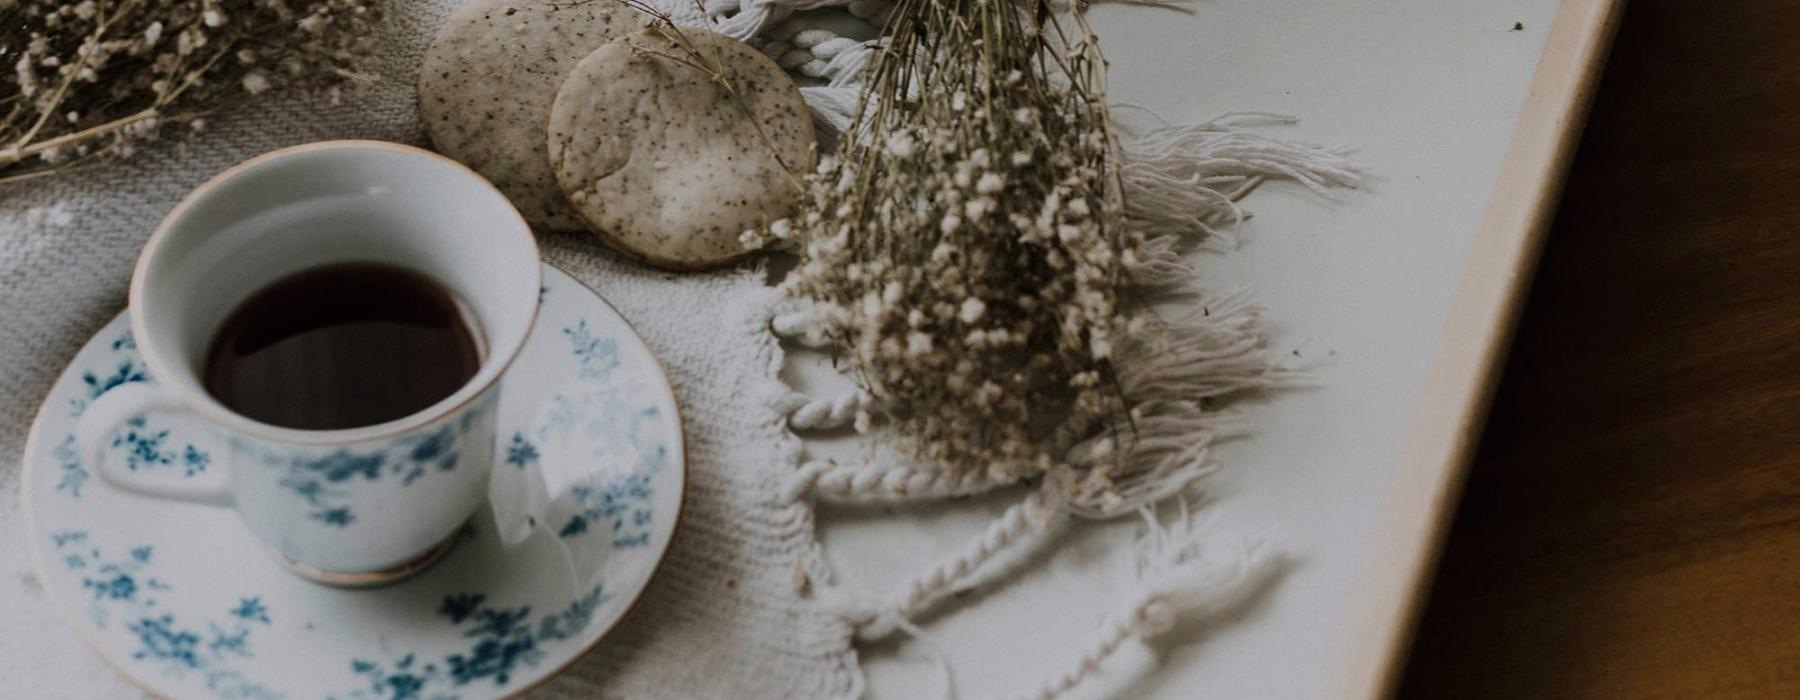 tea and cookies on a serving tray with baby's breath